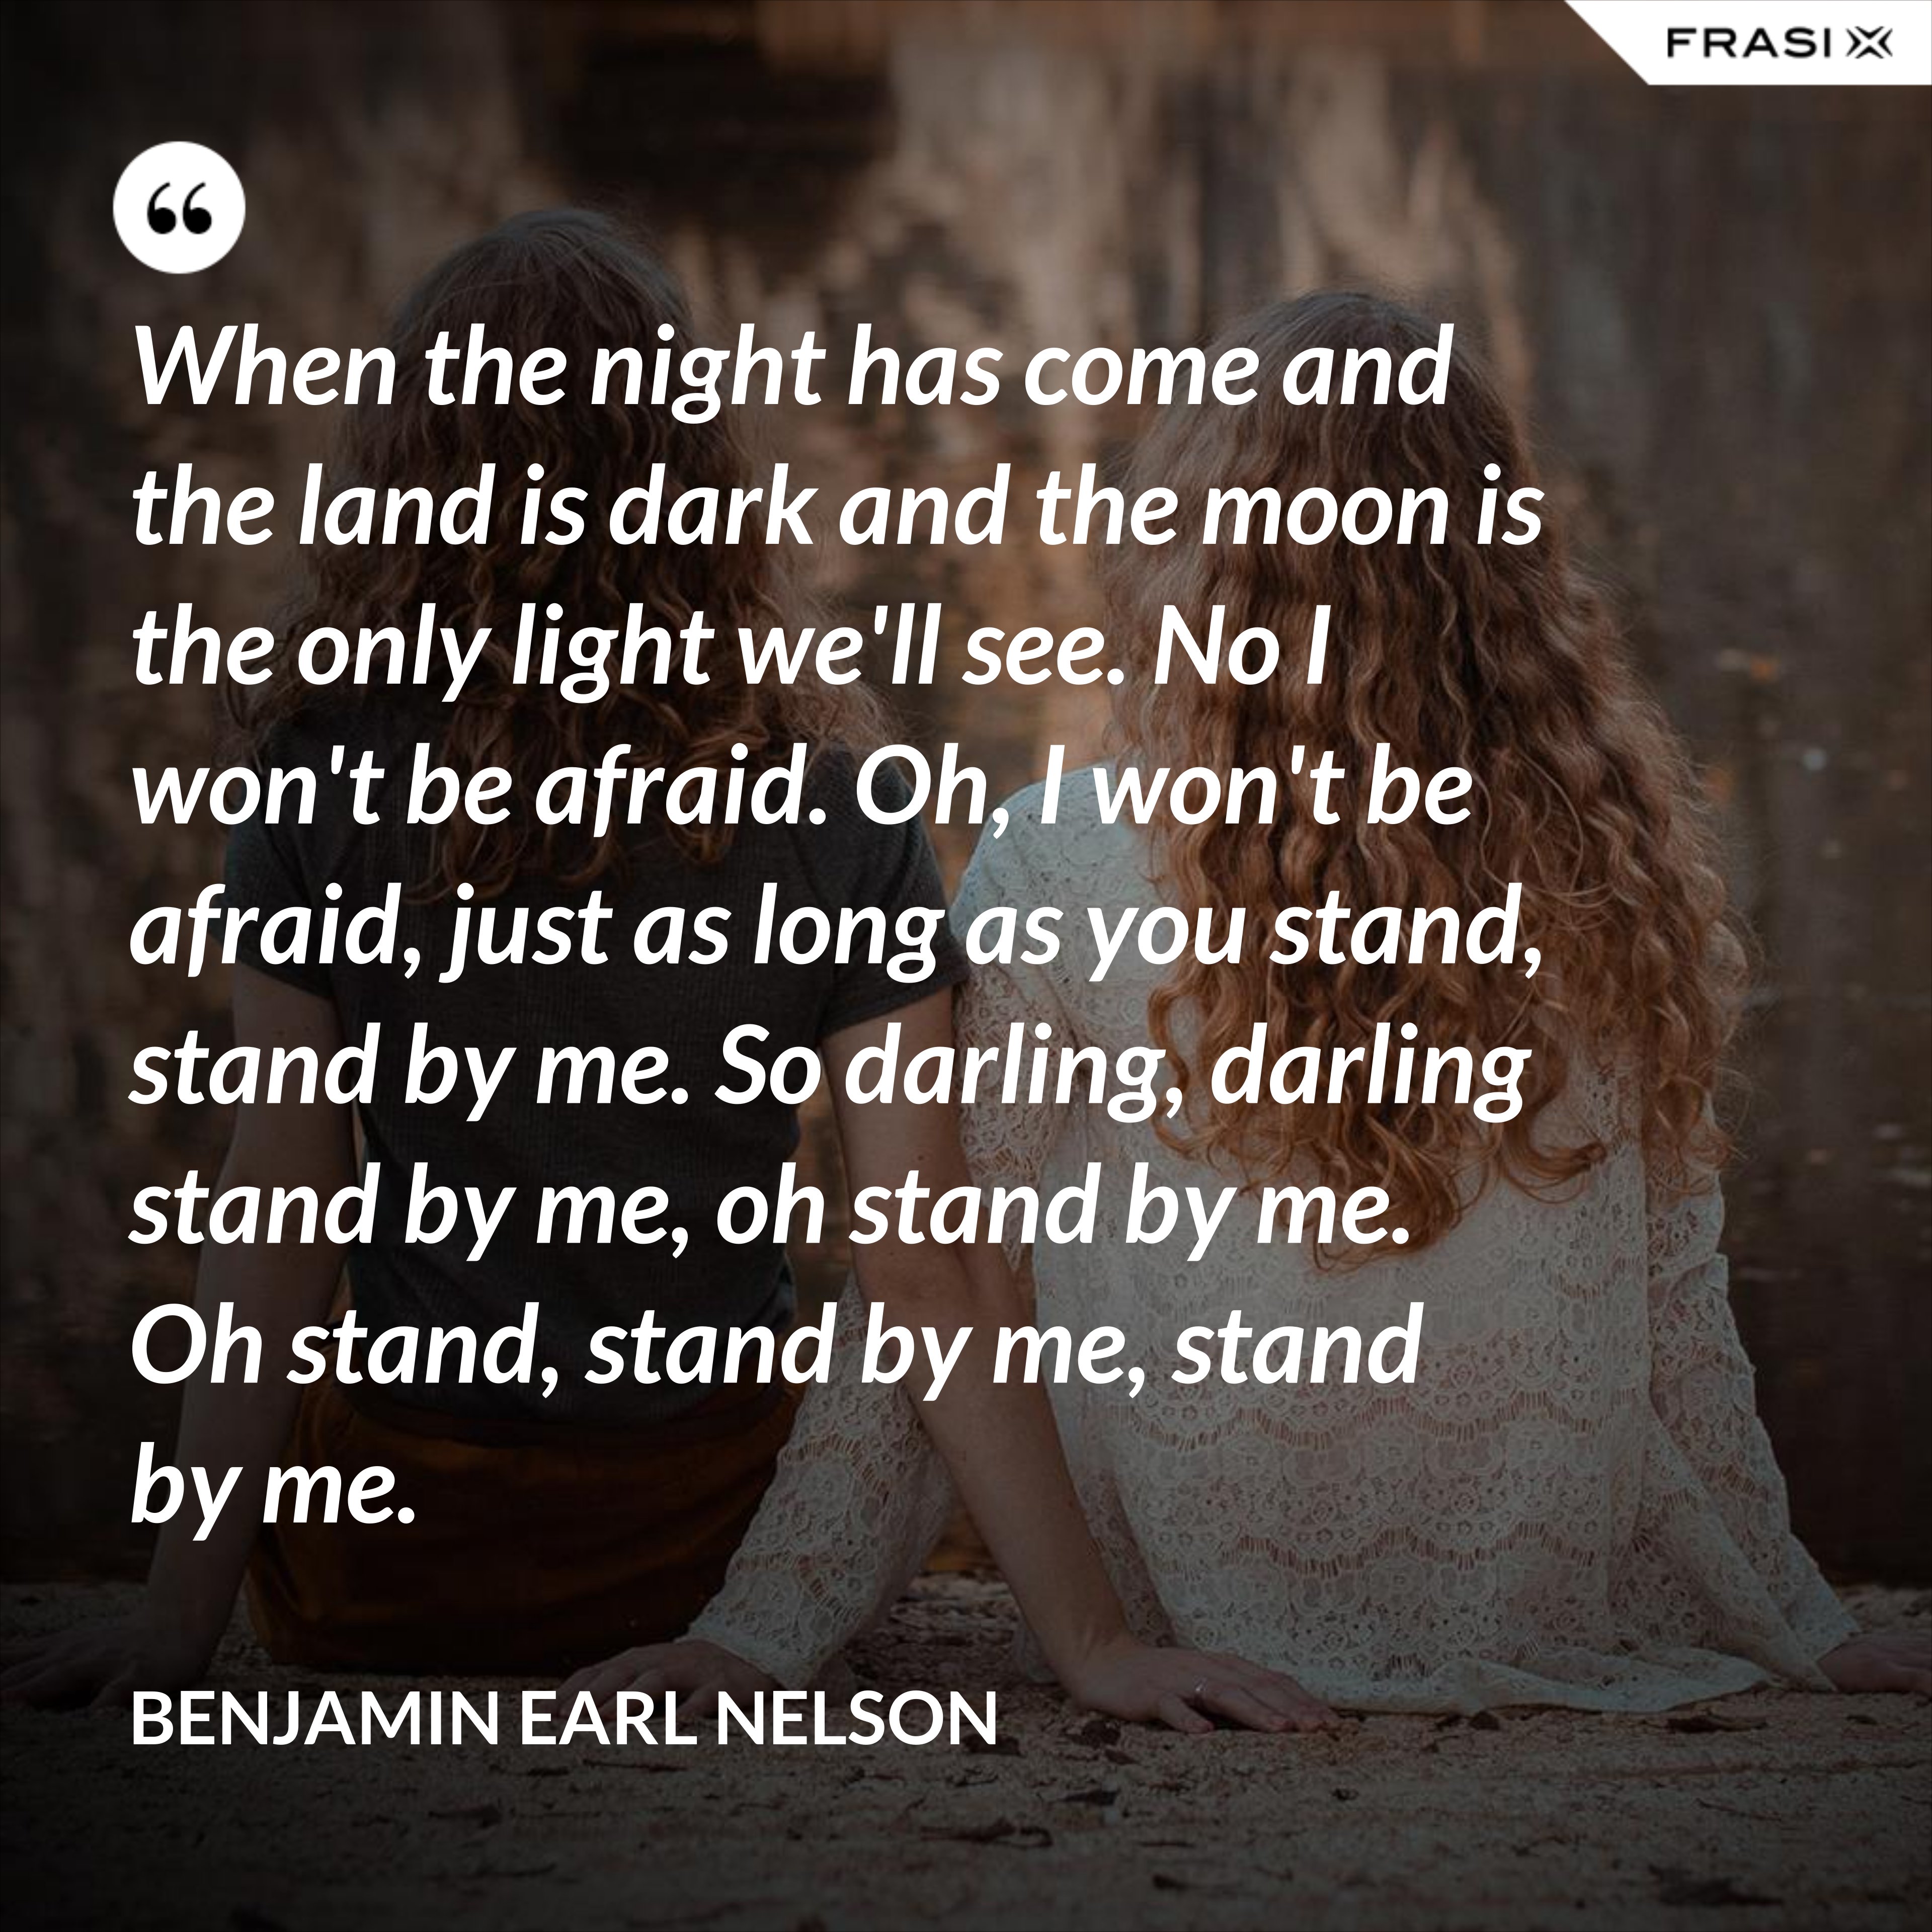 When the night has come and the land is dark and the moon is the only light we'll see. No I won't be afraid. Oh, I won't be afraid, just as long as you stand, stand by me. So darling, darling stand by me, oh stand by me. Oh stand, stand by me, stand by me. - Benjamin Earl Nelson